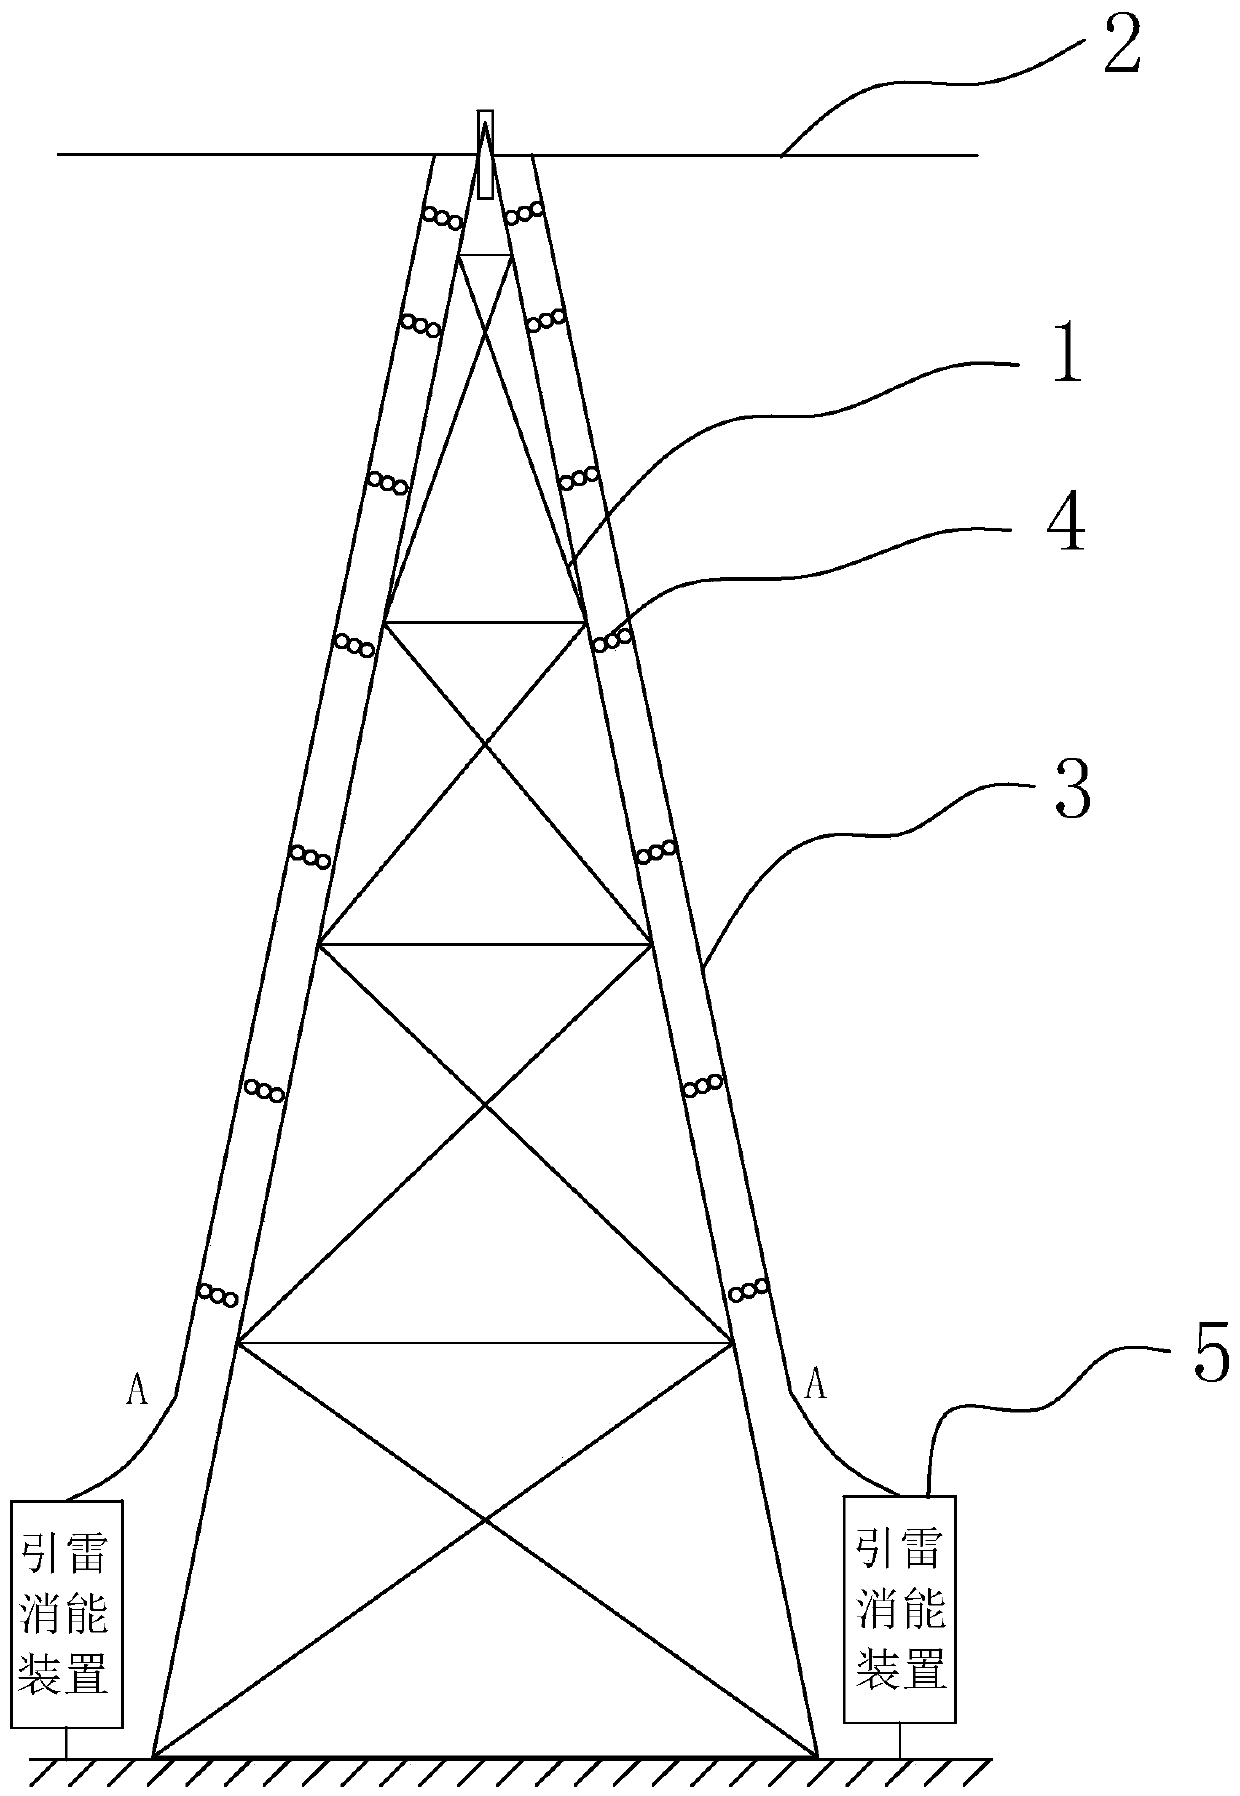 Overhead ground wire pre-guiding lightning and combined electromagnetic energy dissipation device